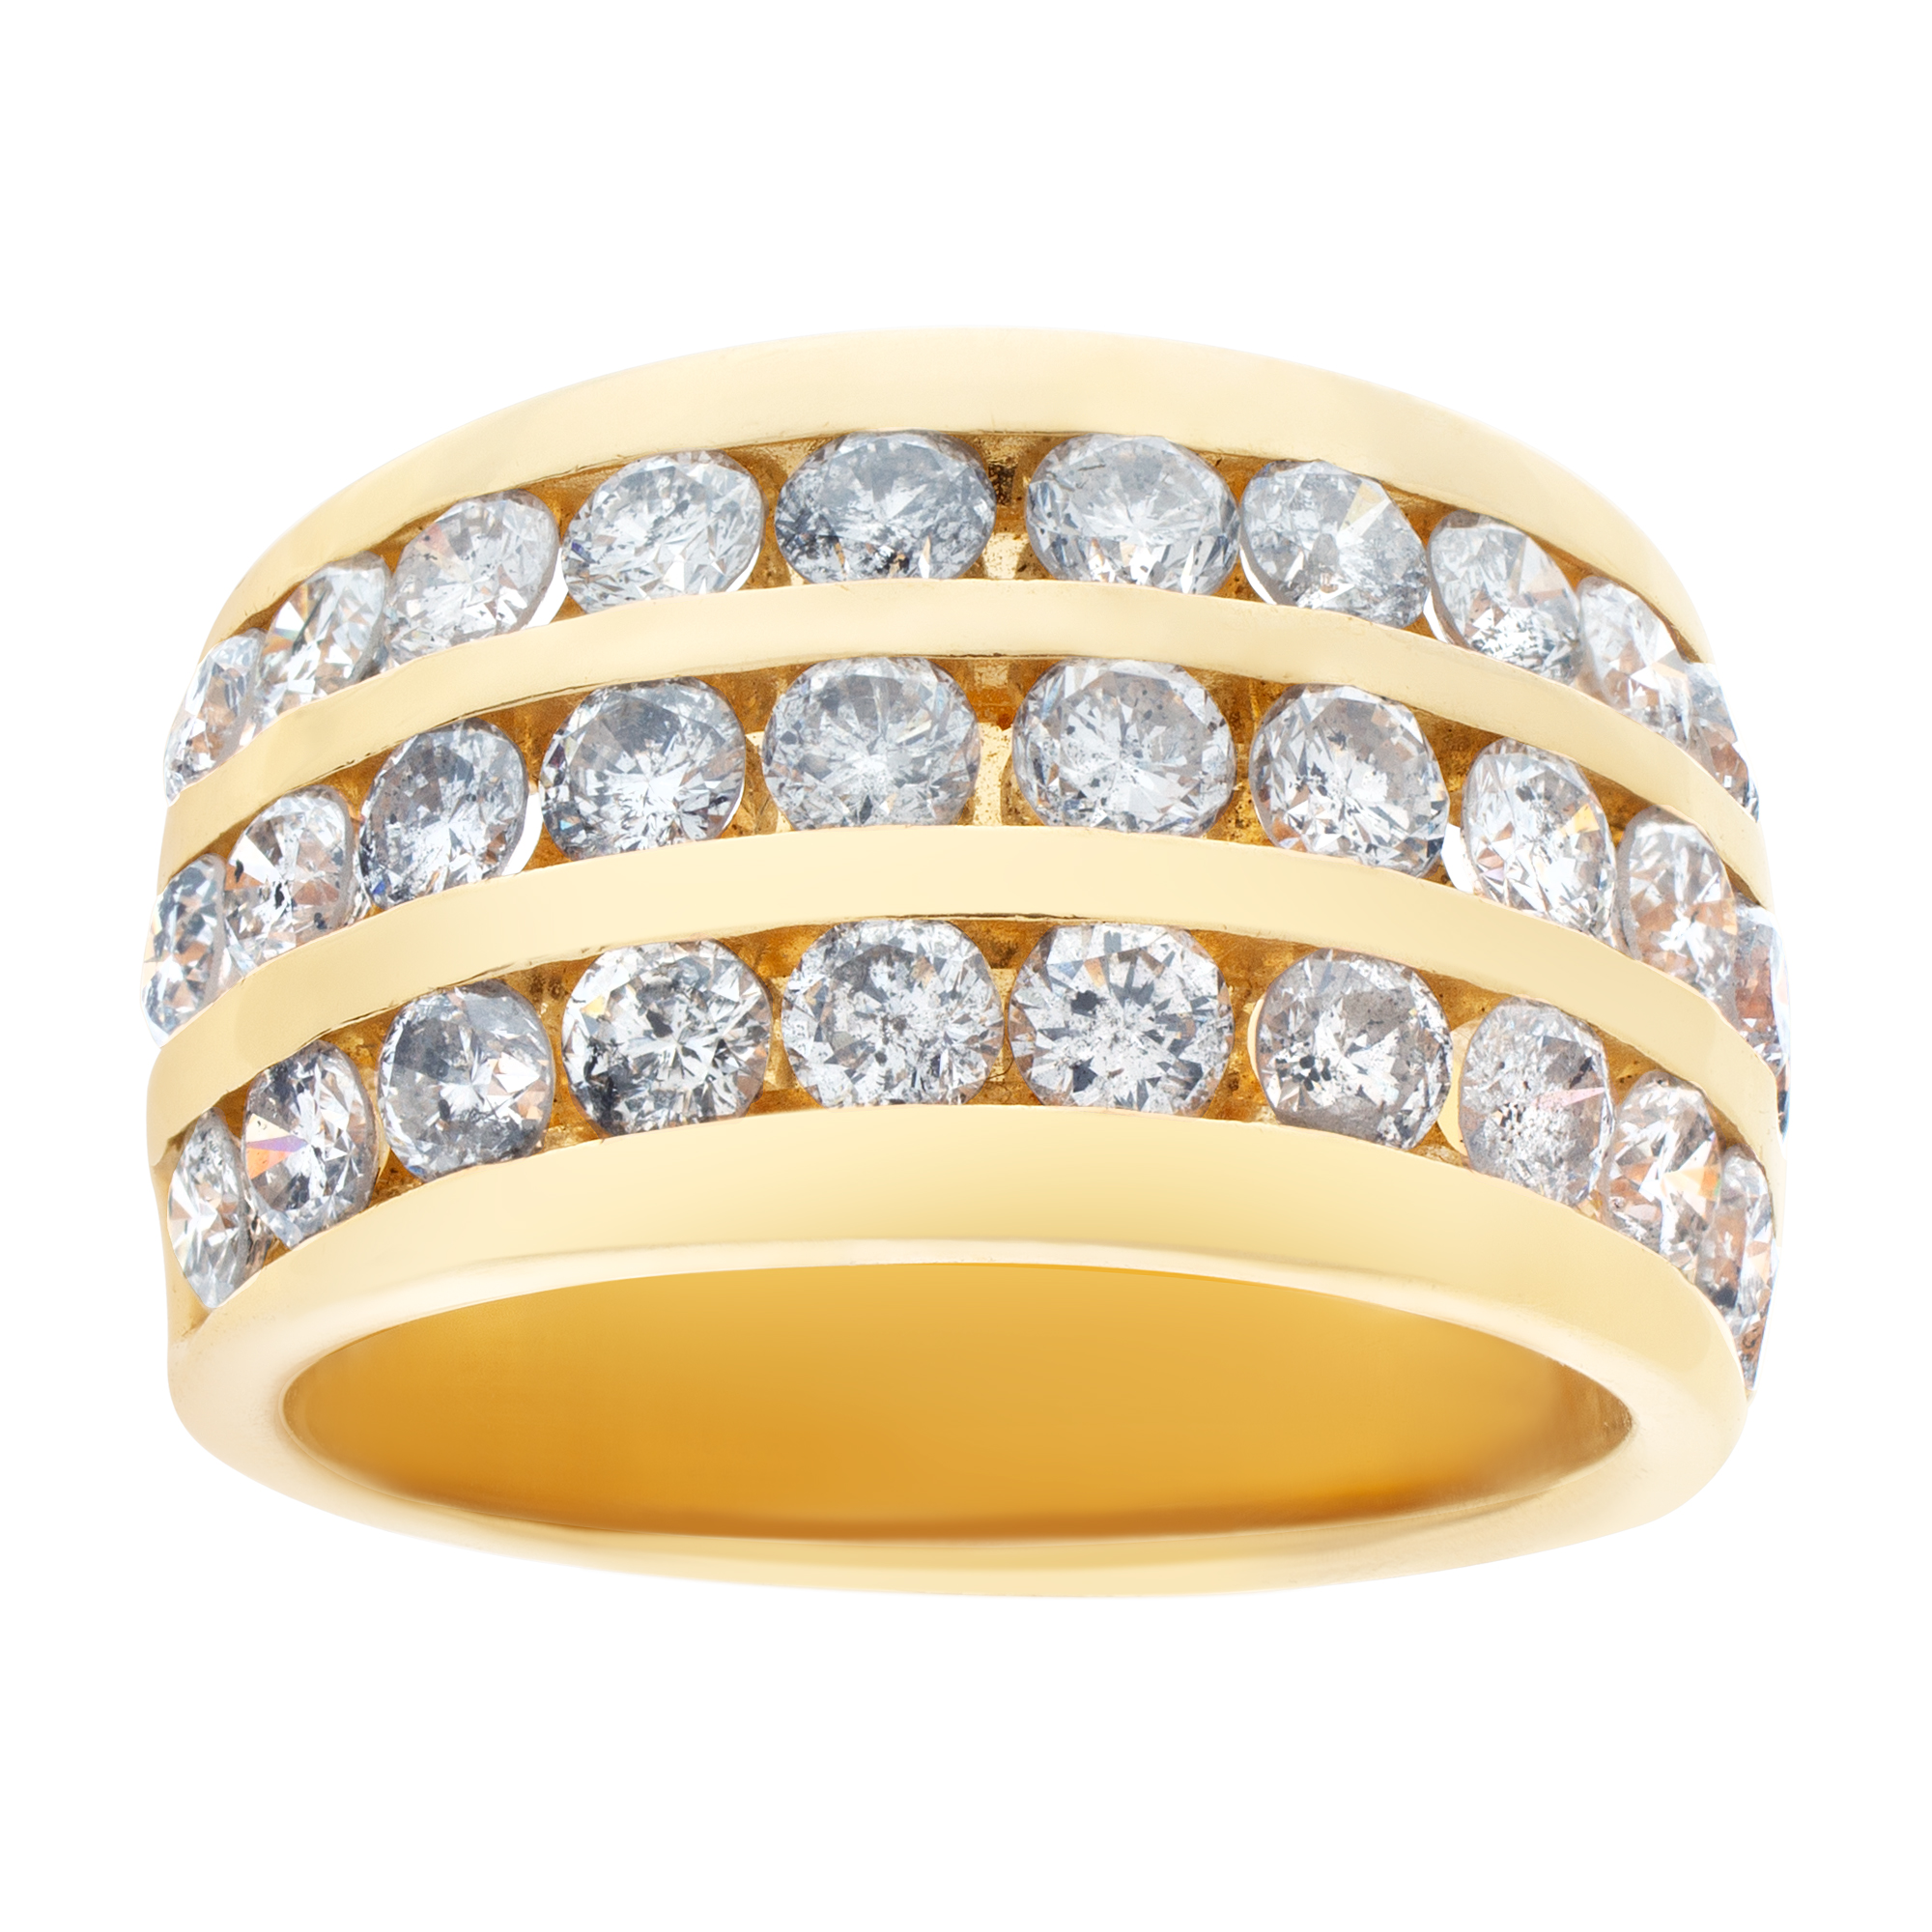 Wide band in 14k yellow gold. 1.50 carats in 3 rows of channel set diamonds image 1